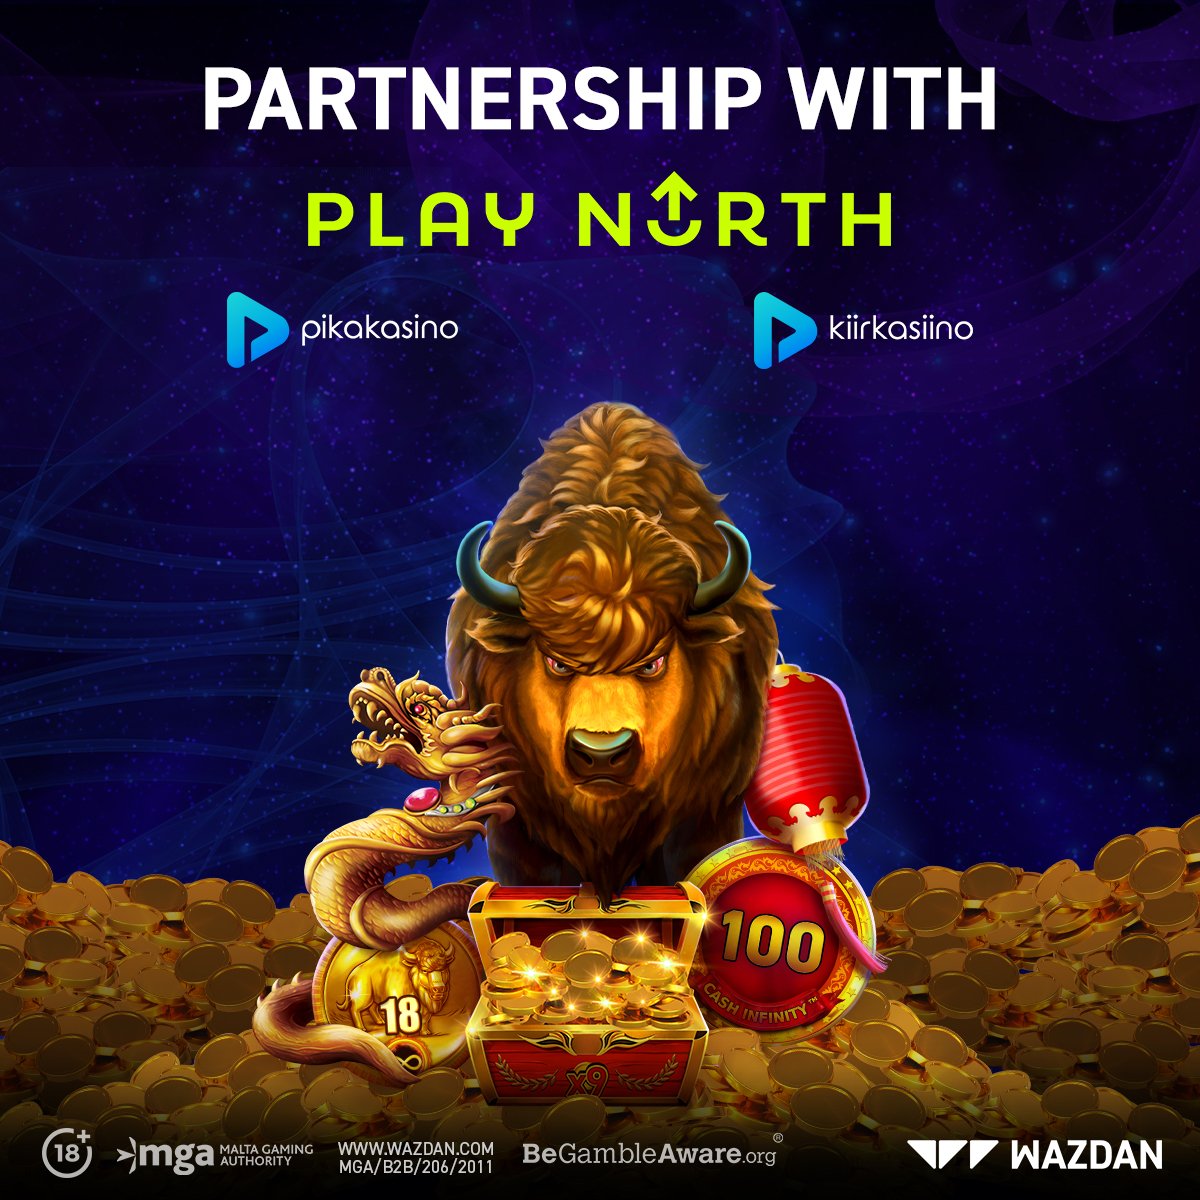 Wazdan and Play North have joined forces! Our top games, including 9 Lions and 9 Coins™, are now available on PlayNorth brands: Pikakasino, Kiirkasiino, and Kansino.

+18 | Play responsibly
